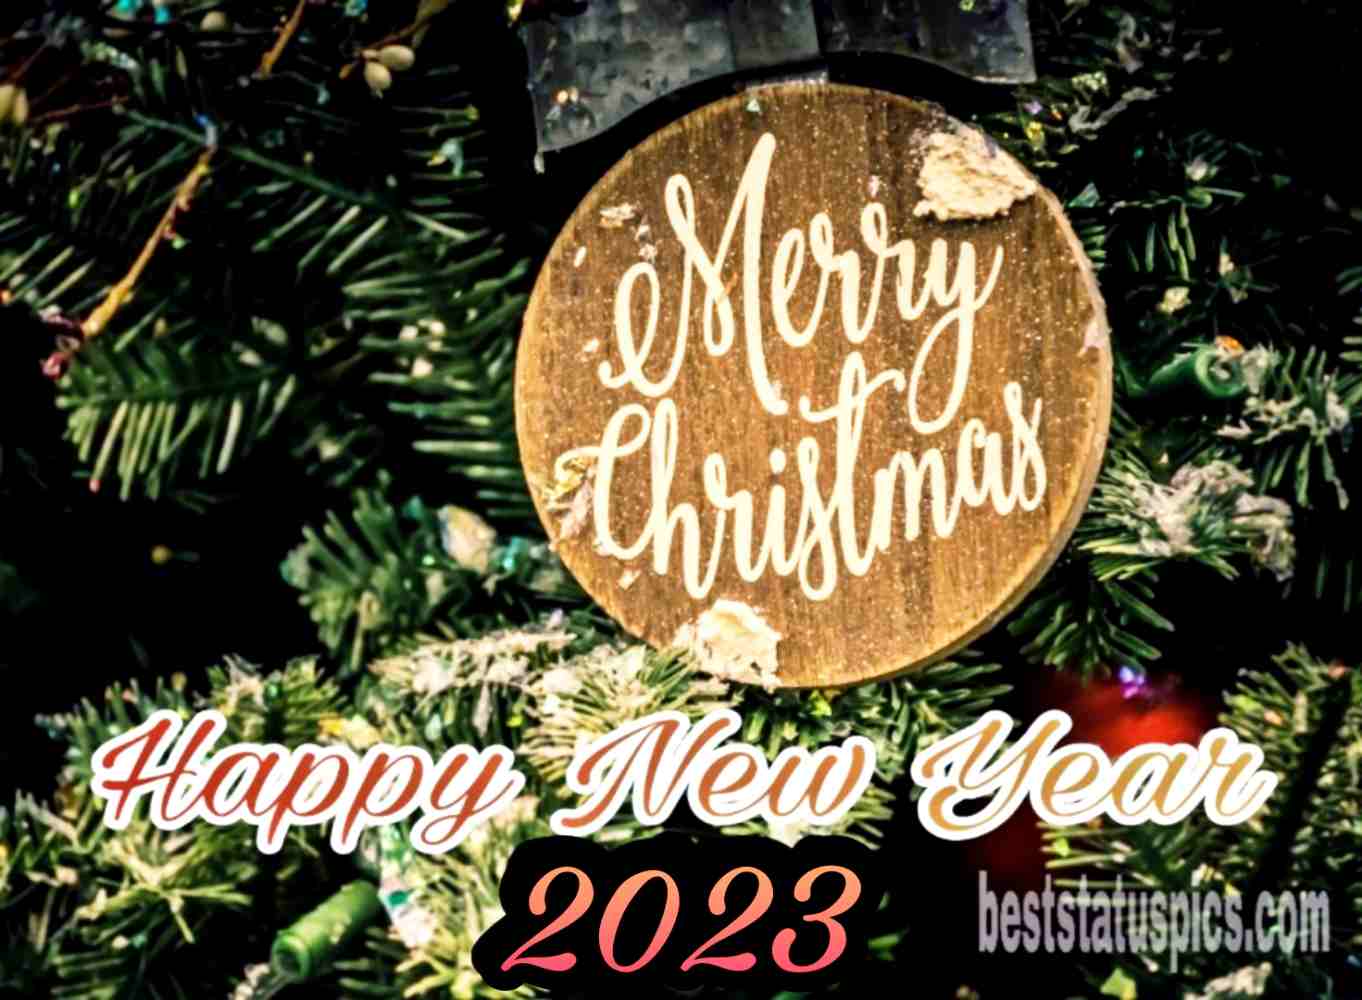 Best Happy New Year 2023 Merry Christmas wishes picture for friend